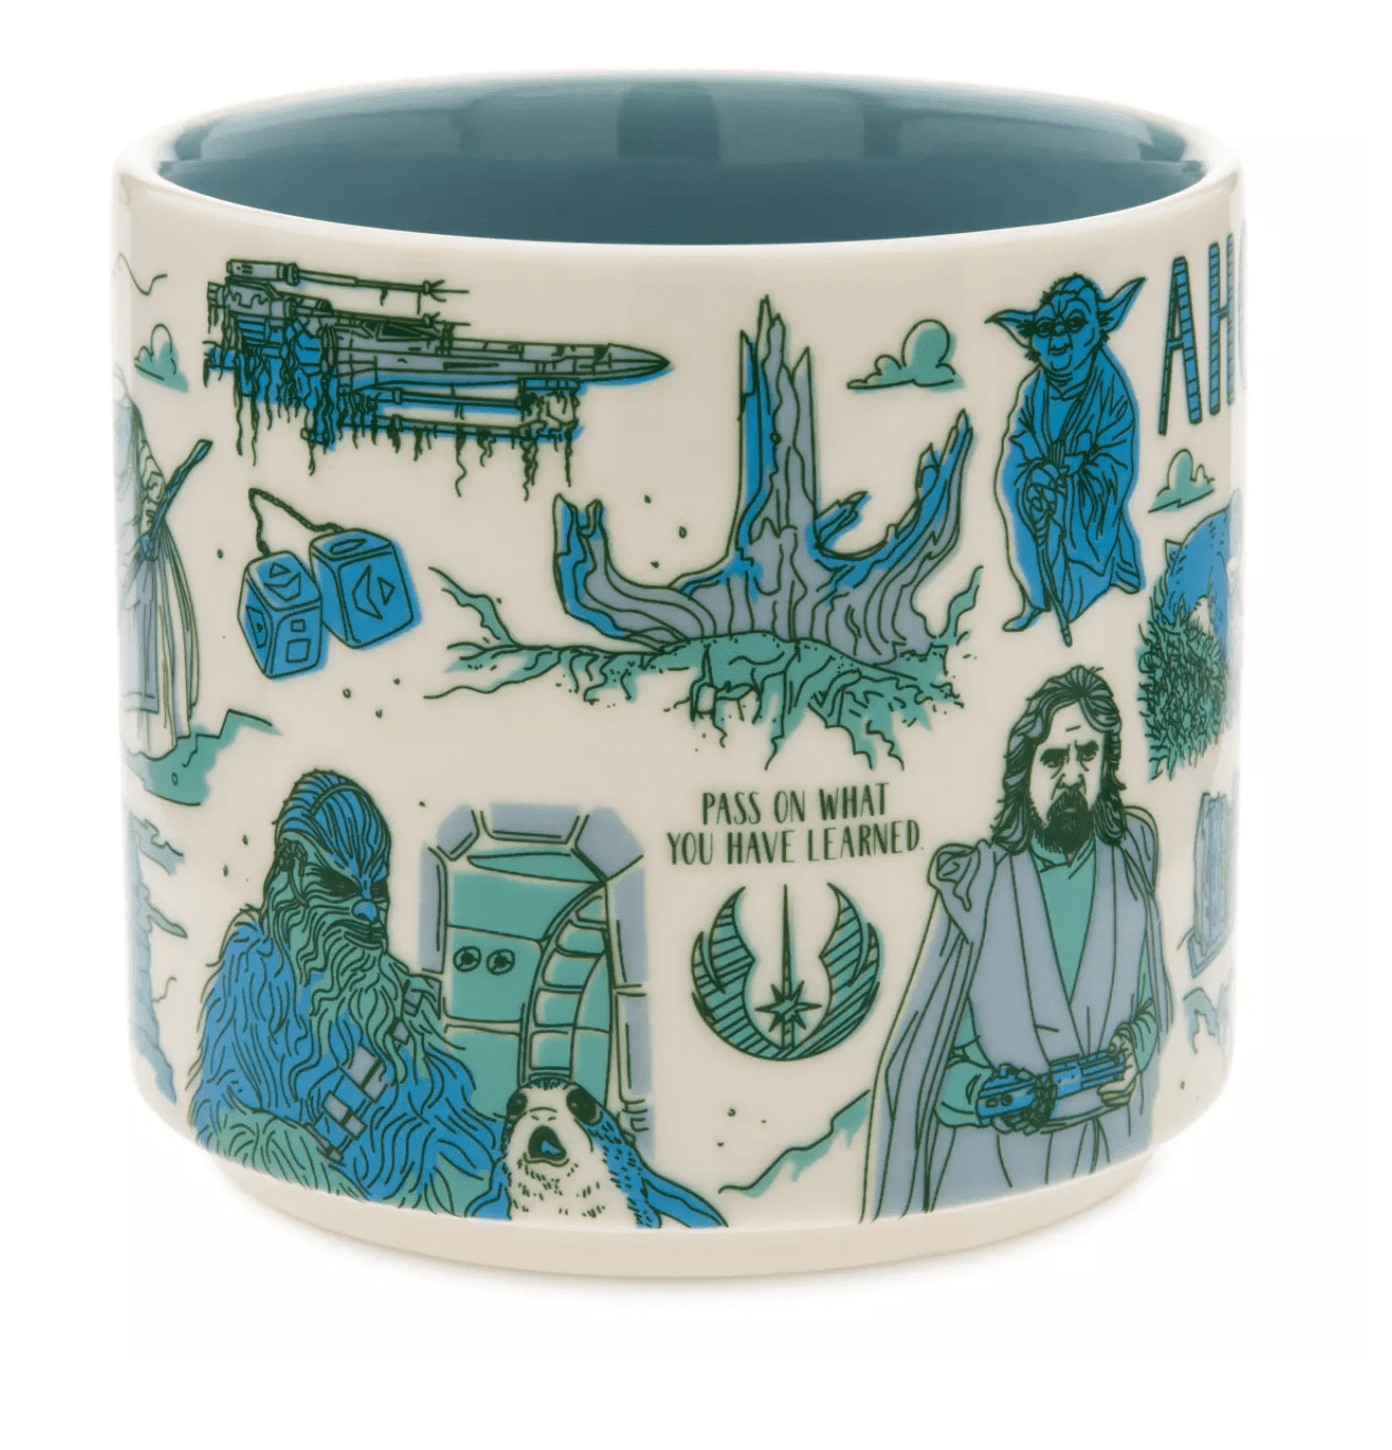 Product Review: 'BEEN THERE SERIES': Star Wars Mugs Collection